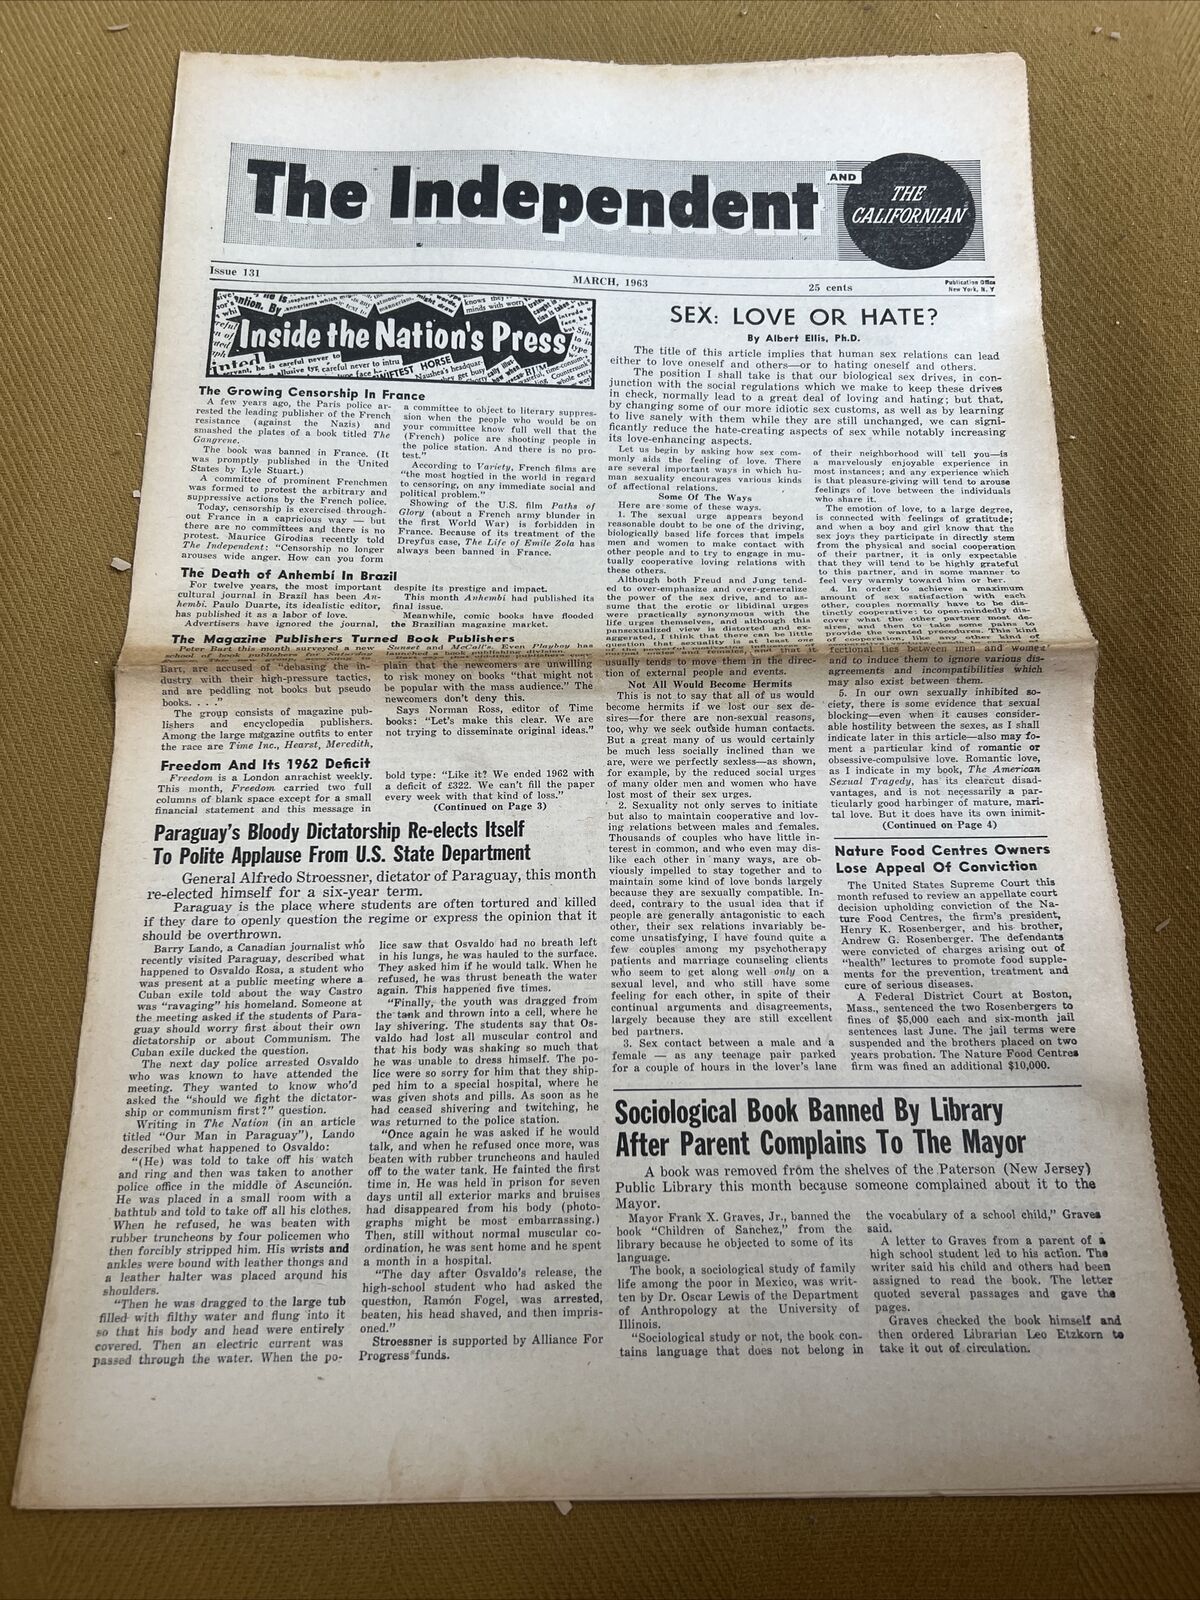 vintage newspaper The Independent and The Californian March 1963 fd93